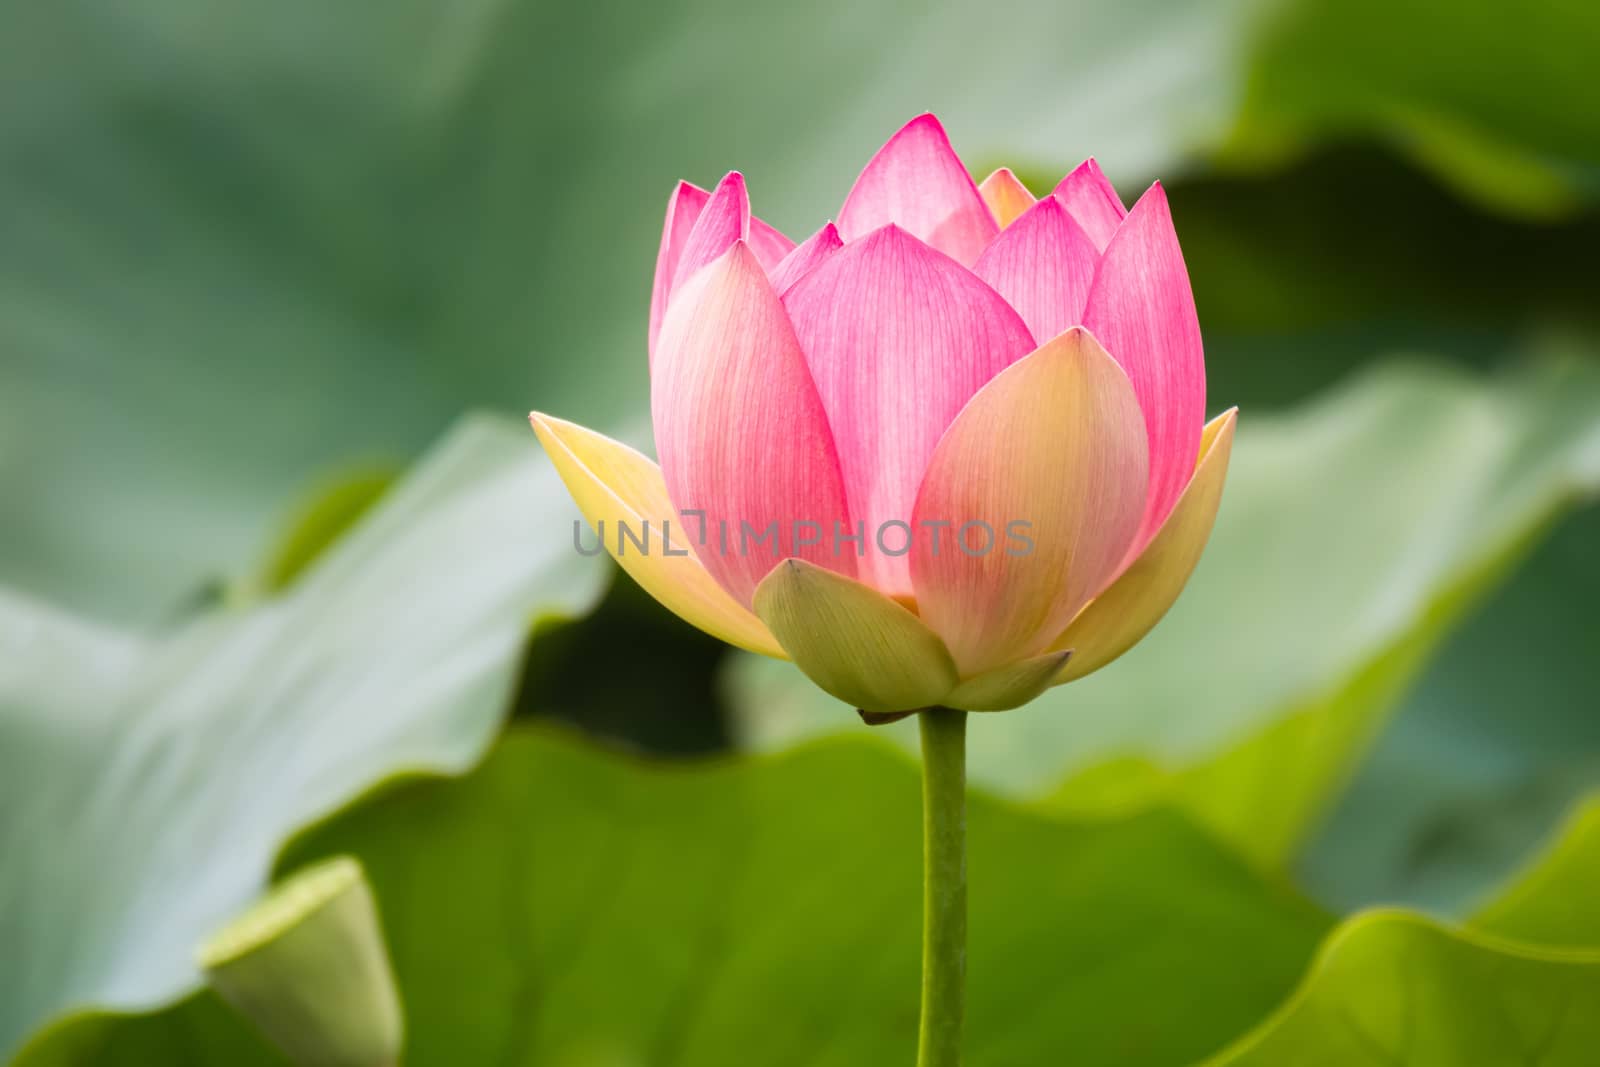 An image of a beautiful lotus flower blossom in the garden pond